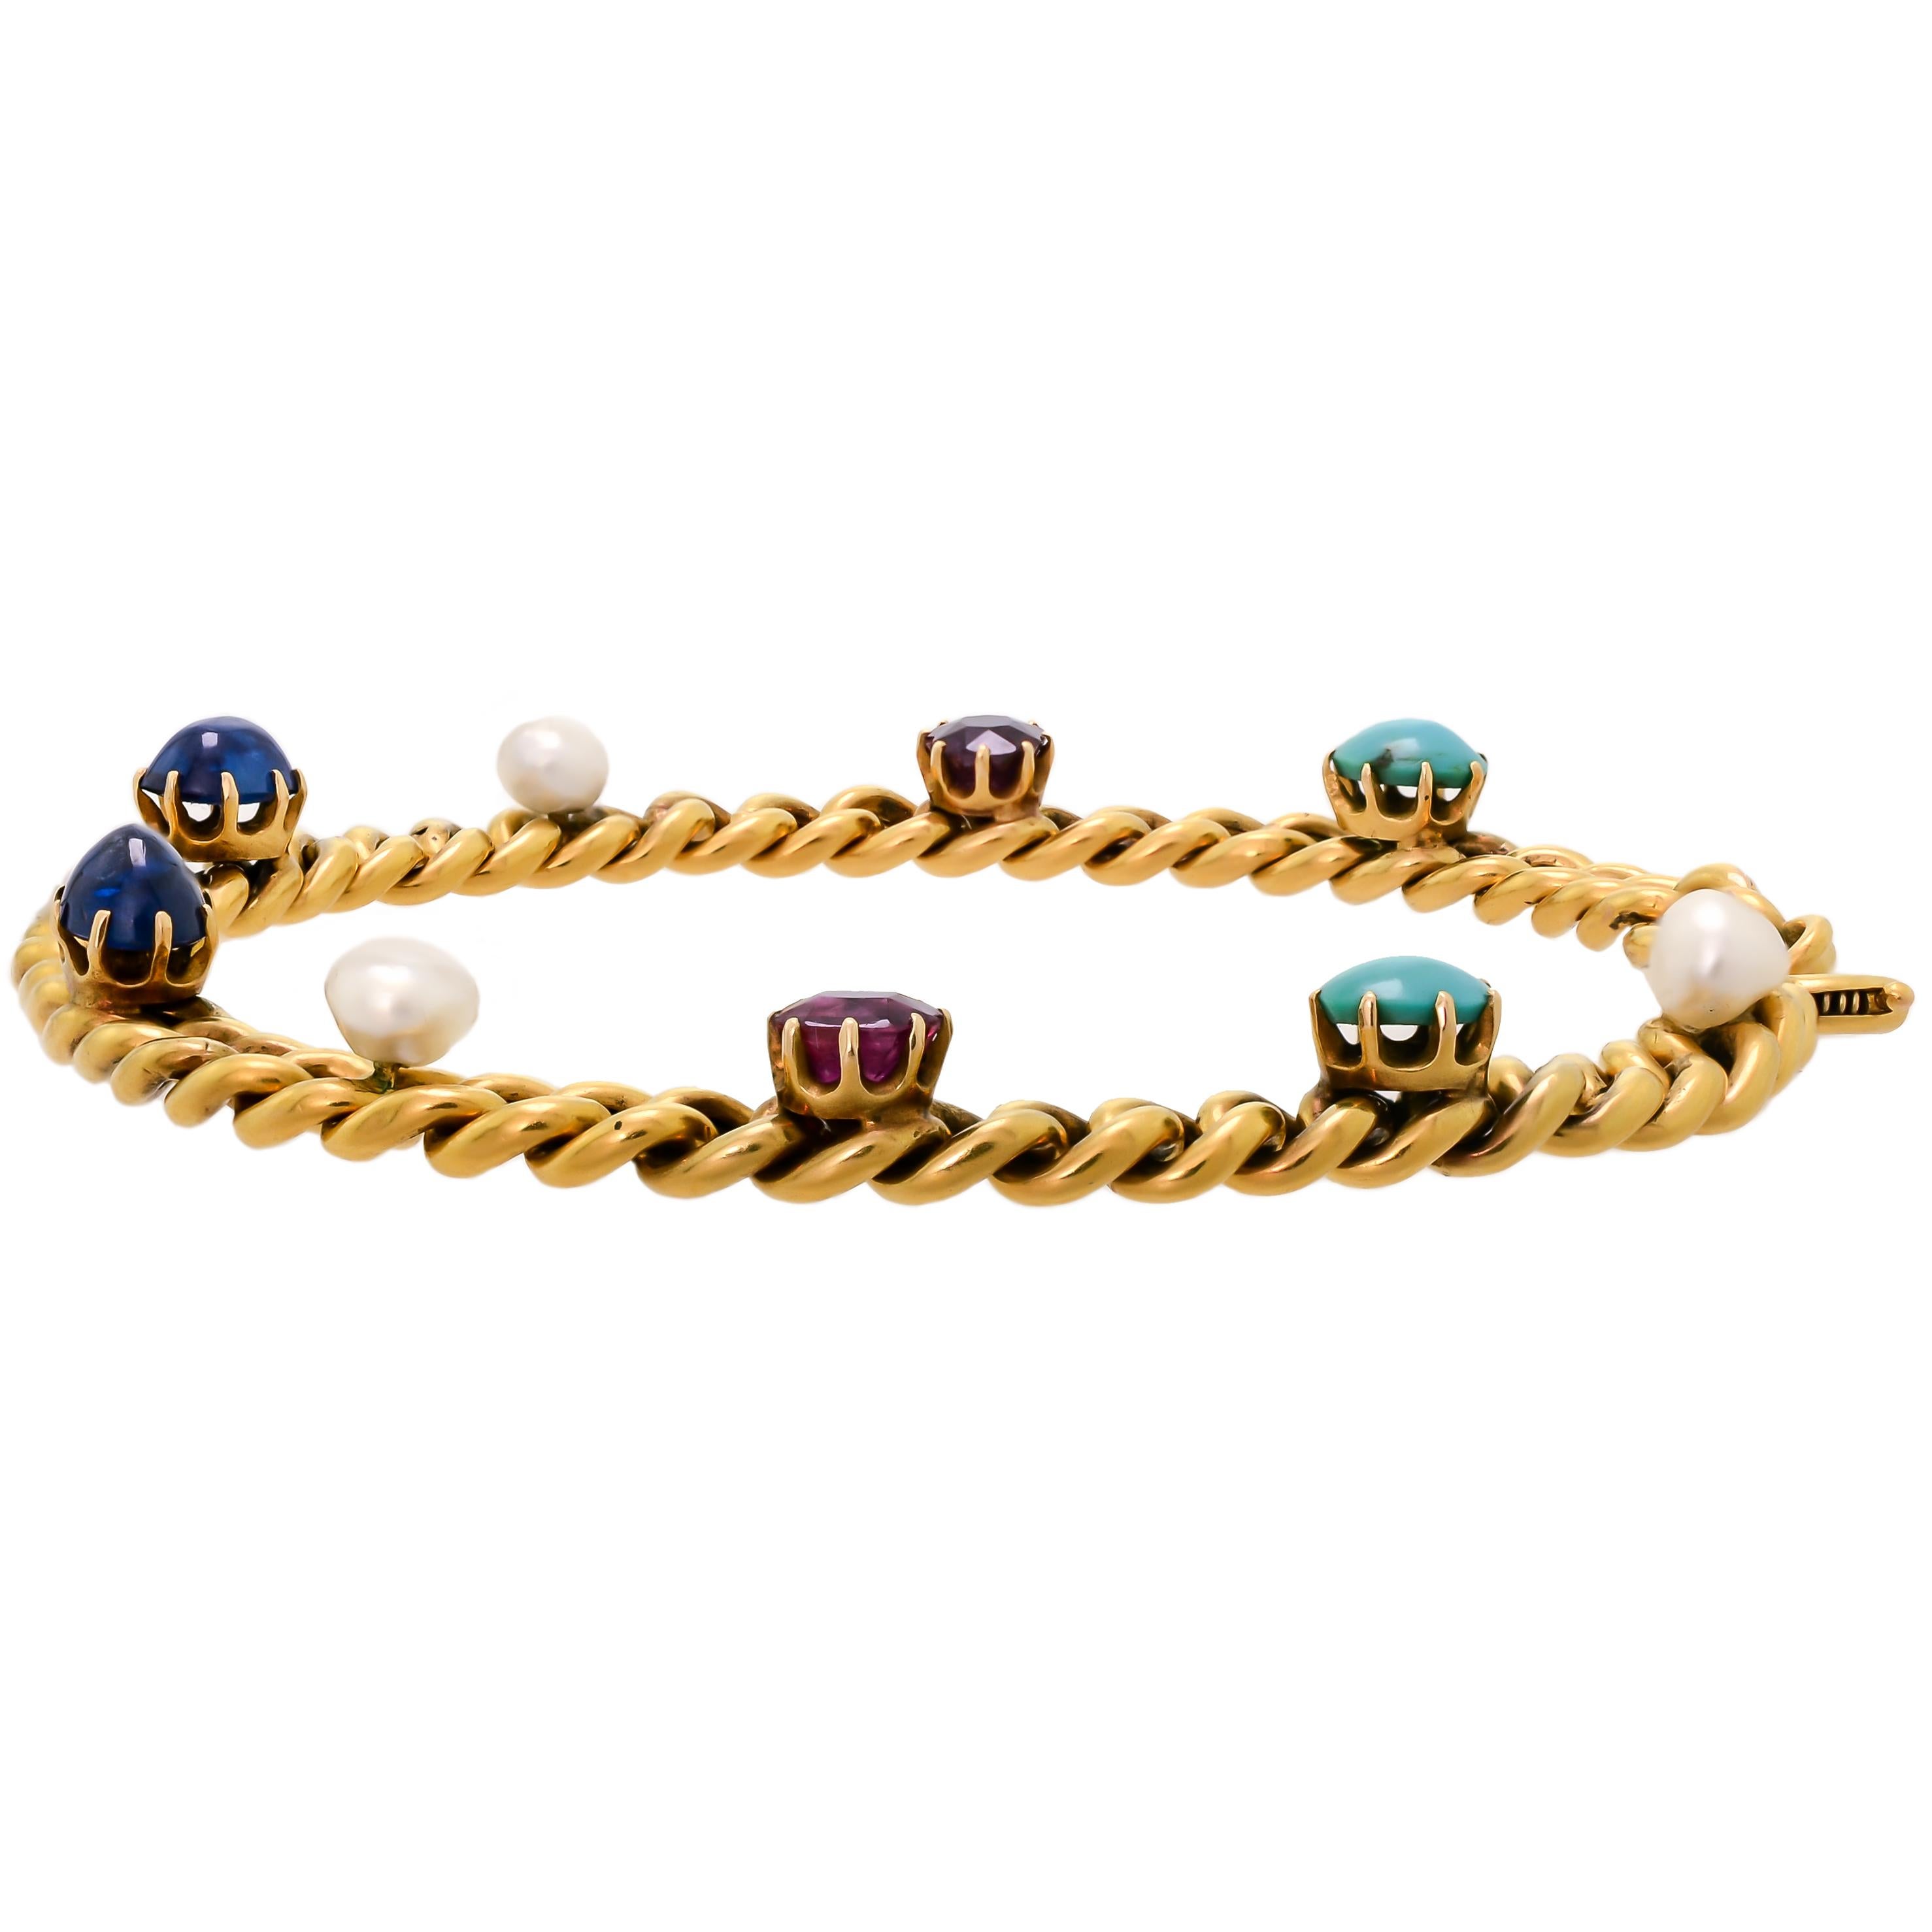 Delightful Victorian 18 Karat Yellow Gold Curb-Link, Gem-Set Bracelet In Good Condition For Sale In Lombard, IL